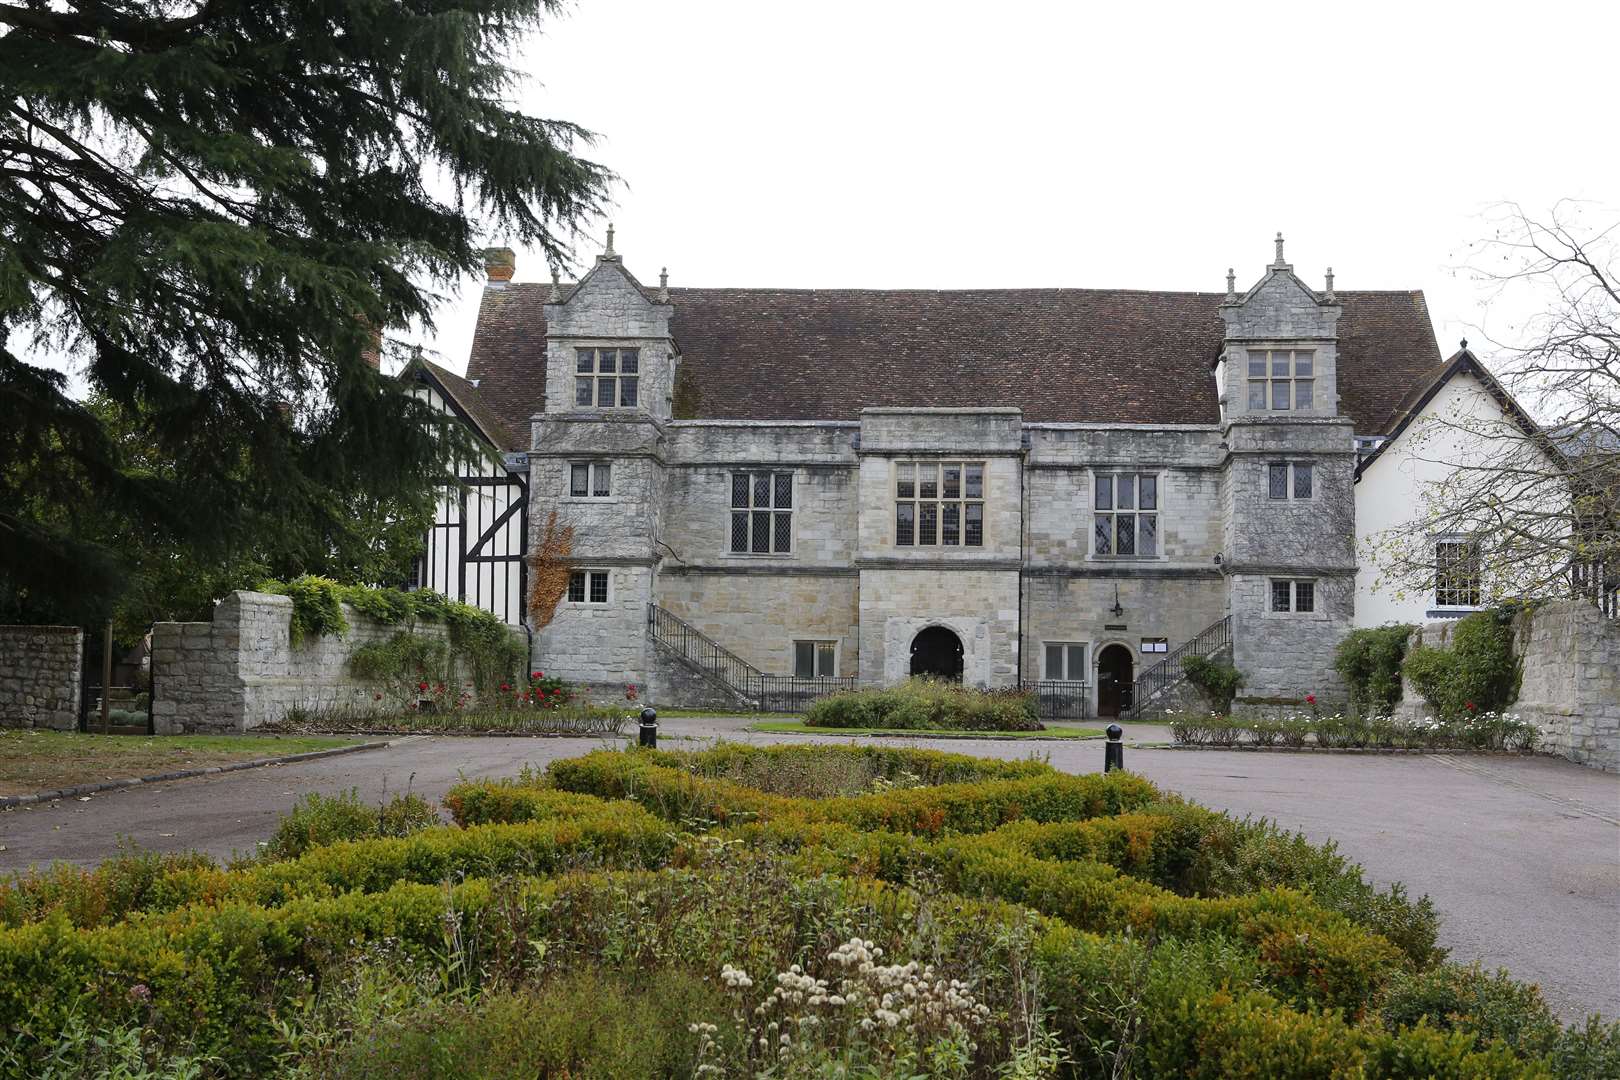 Archbishops Palace, Maidstone, where the inquest was held